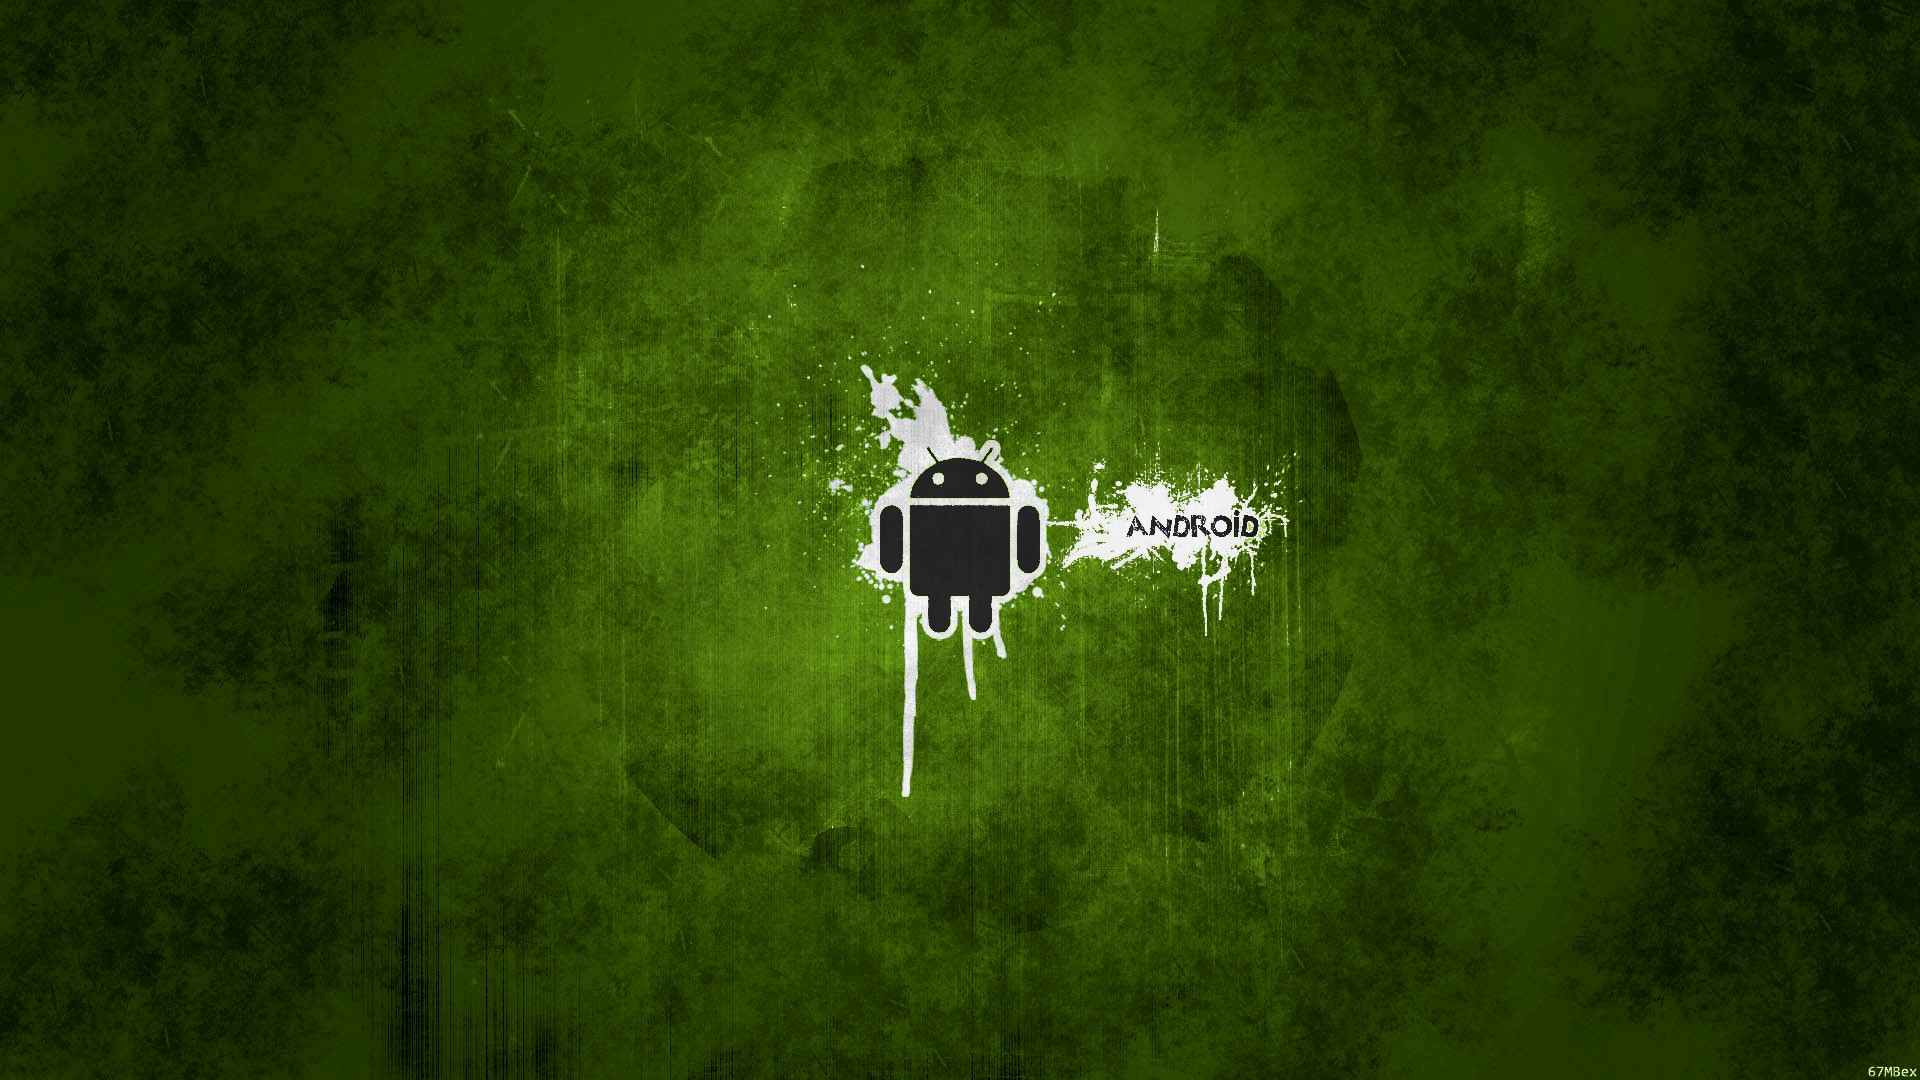 Awesome Live Wallpapers Android VD6 #13773 Wallpaper ...